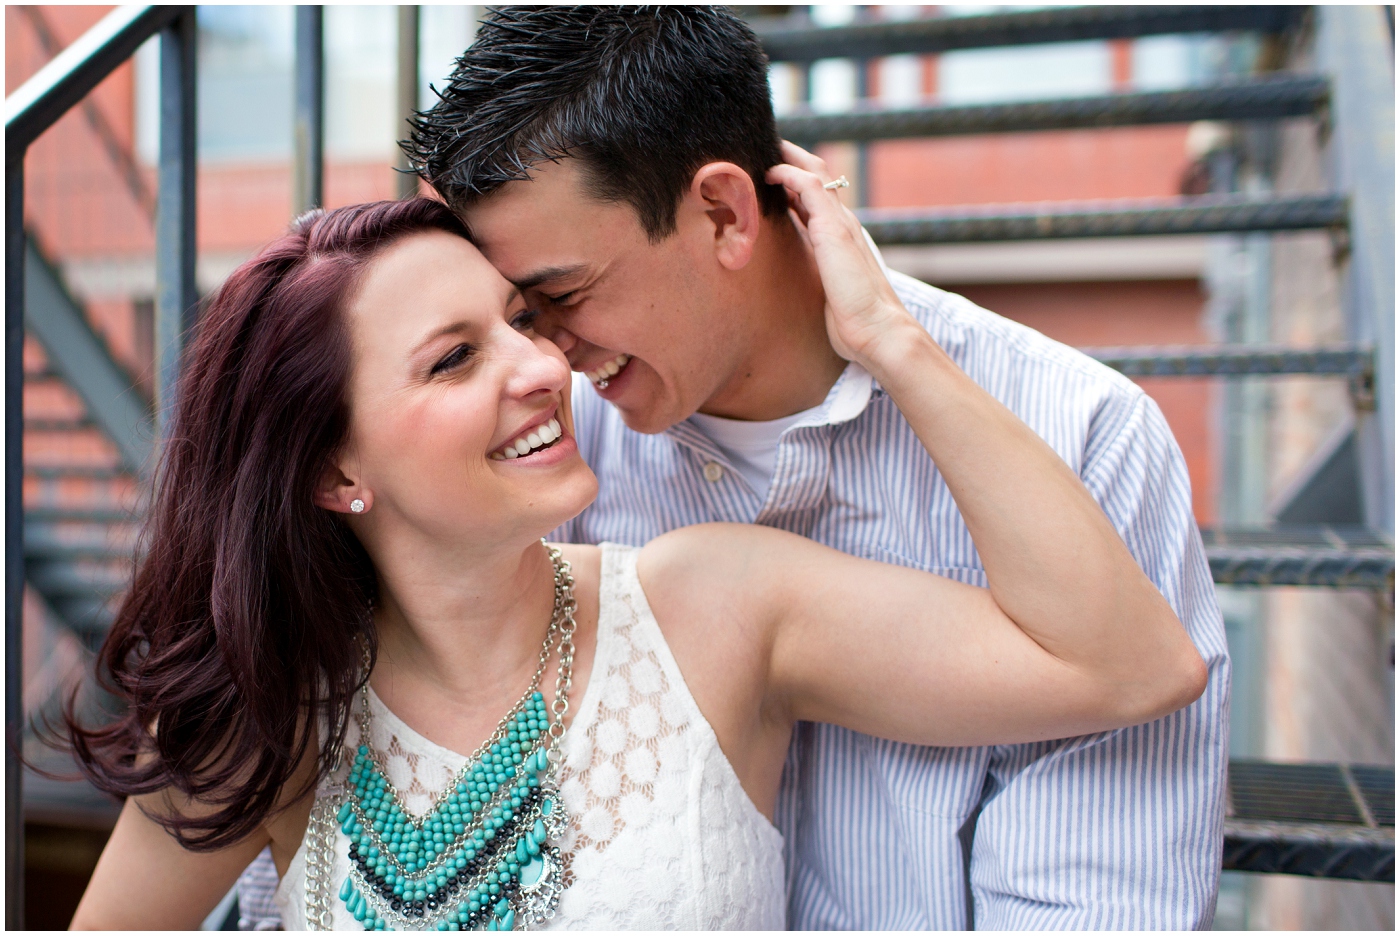 picture of urban engagement photos in boulder, colorado